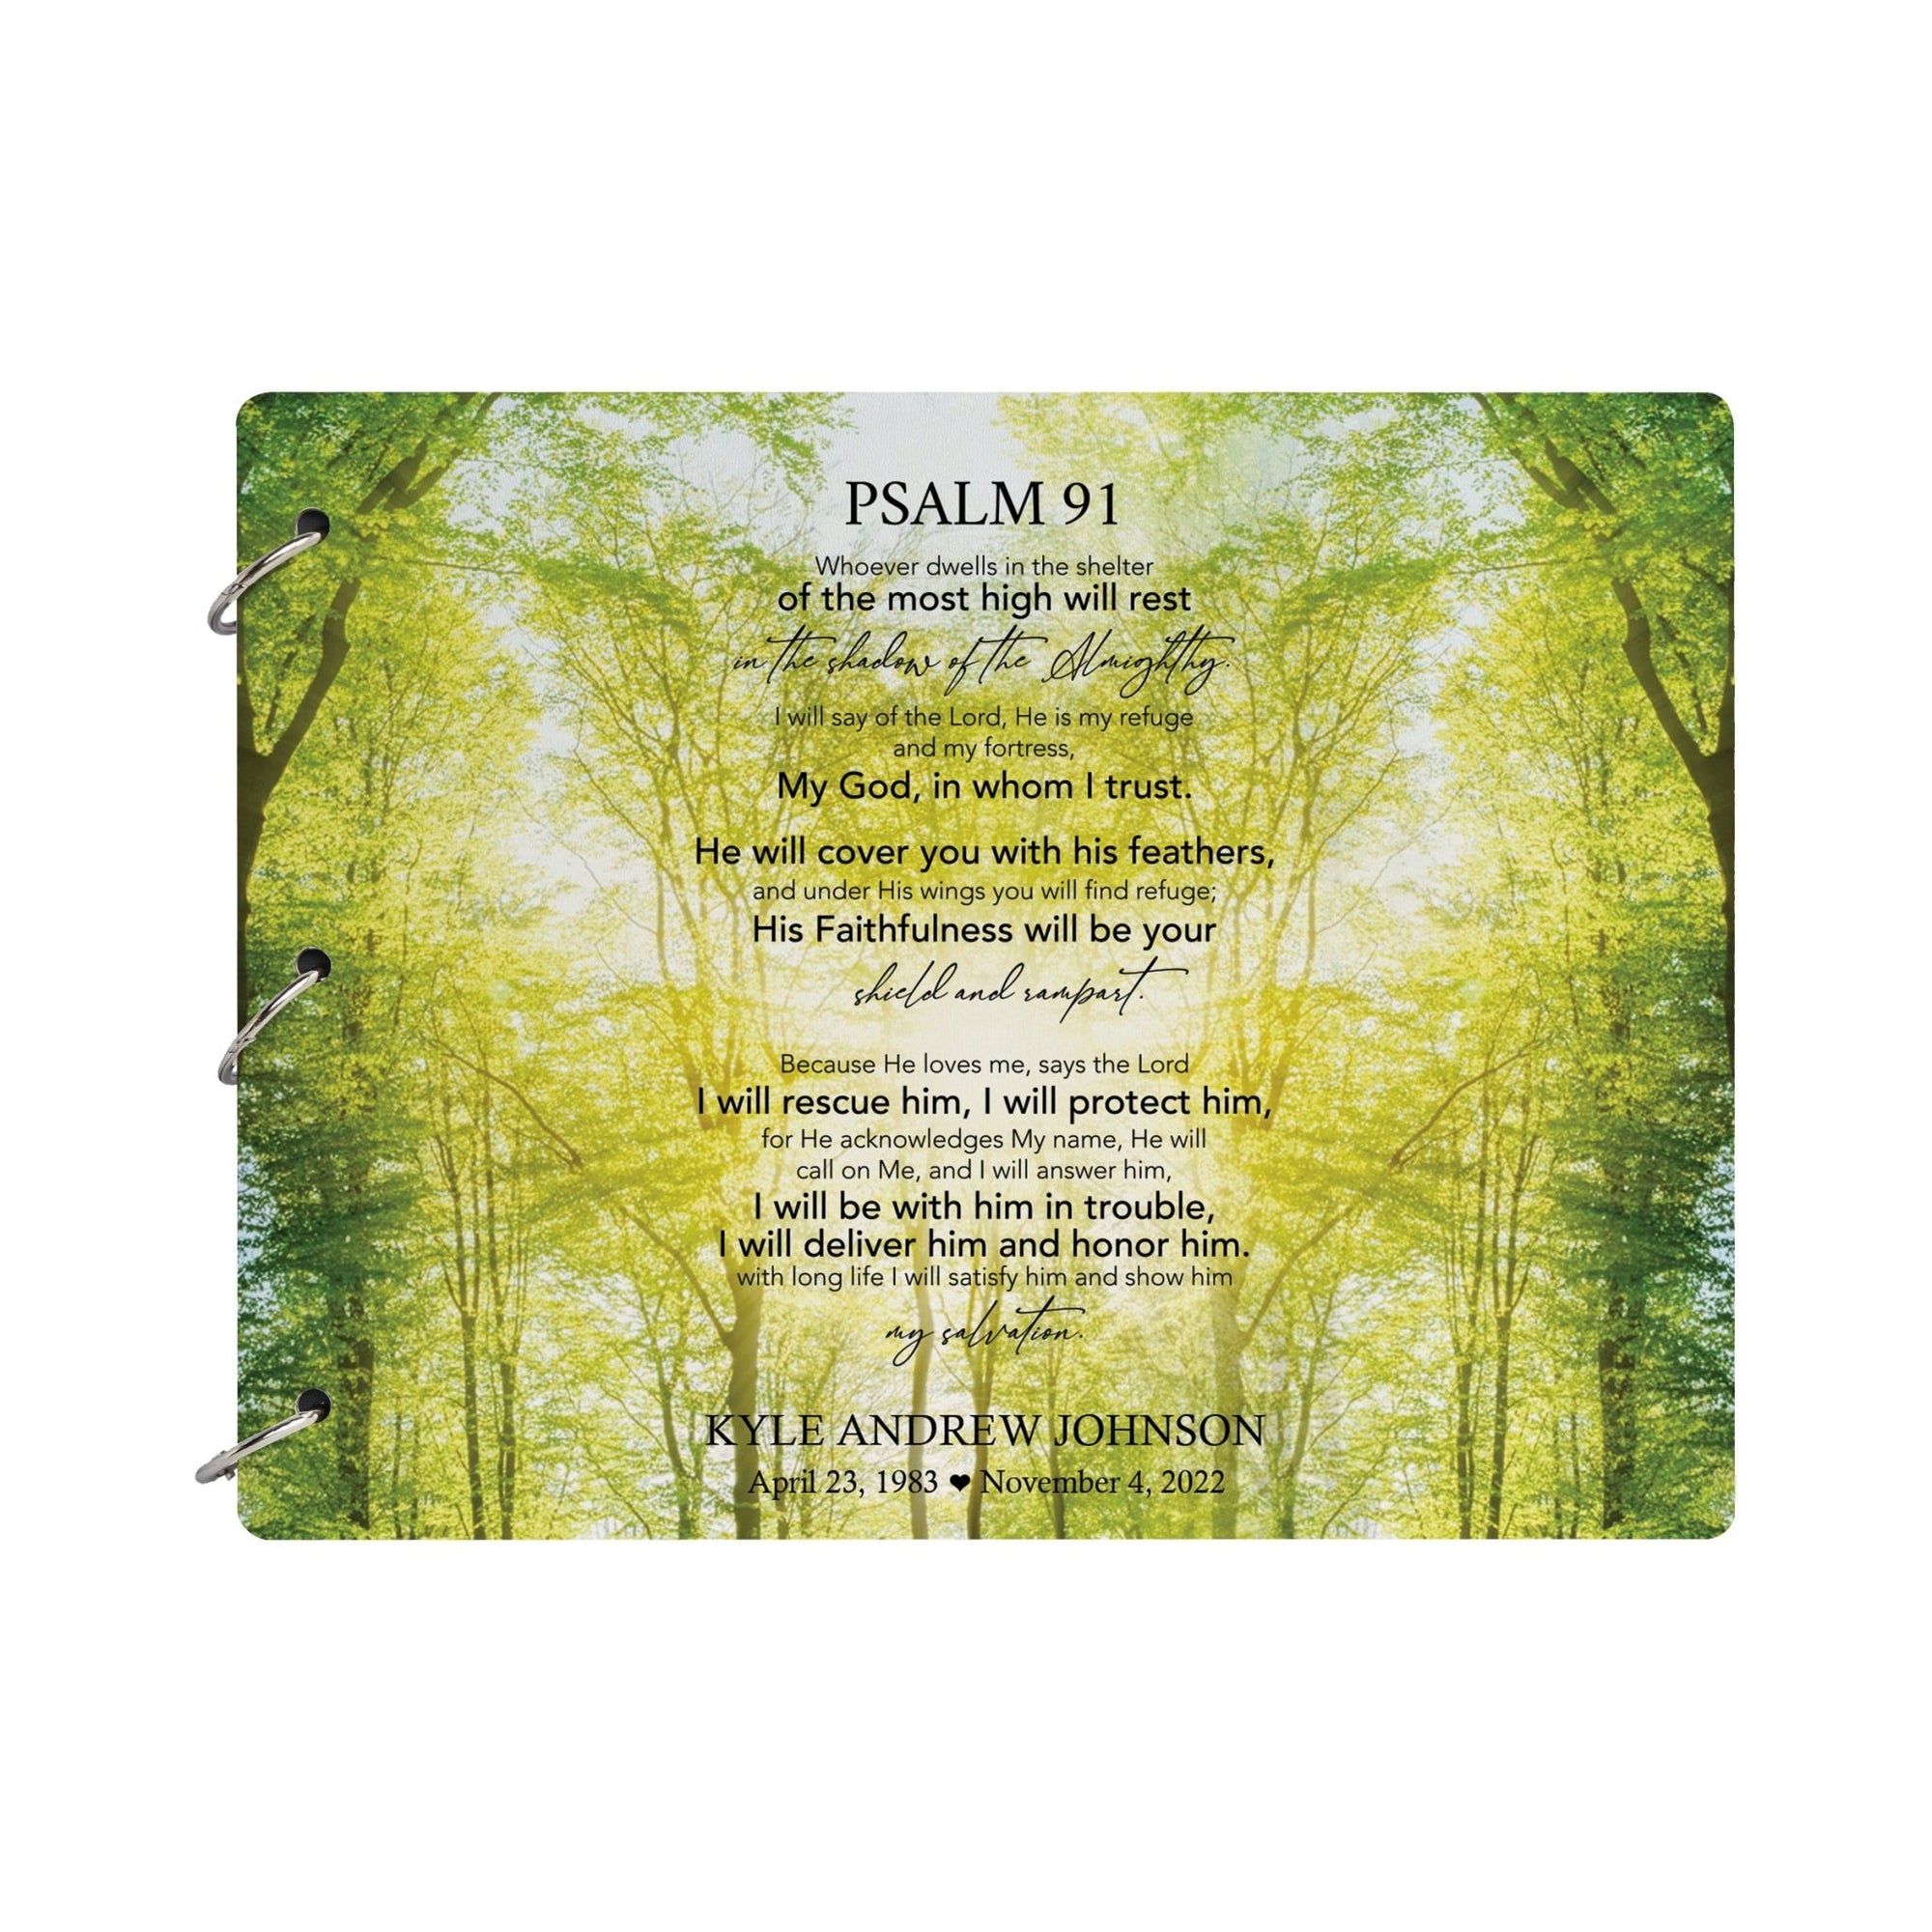 Personalized Celebration Of Life Funeral Guest Books For Memorial Services Registry With Wooden Cover - Psalm 91 - LifeSong Milestones